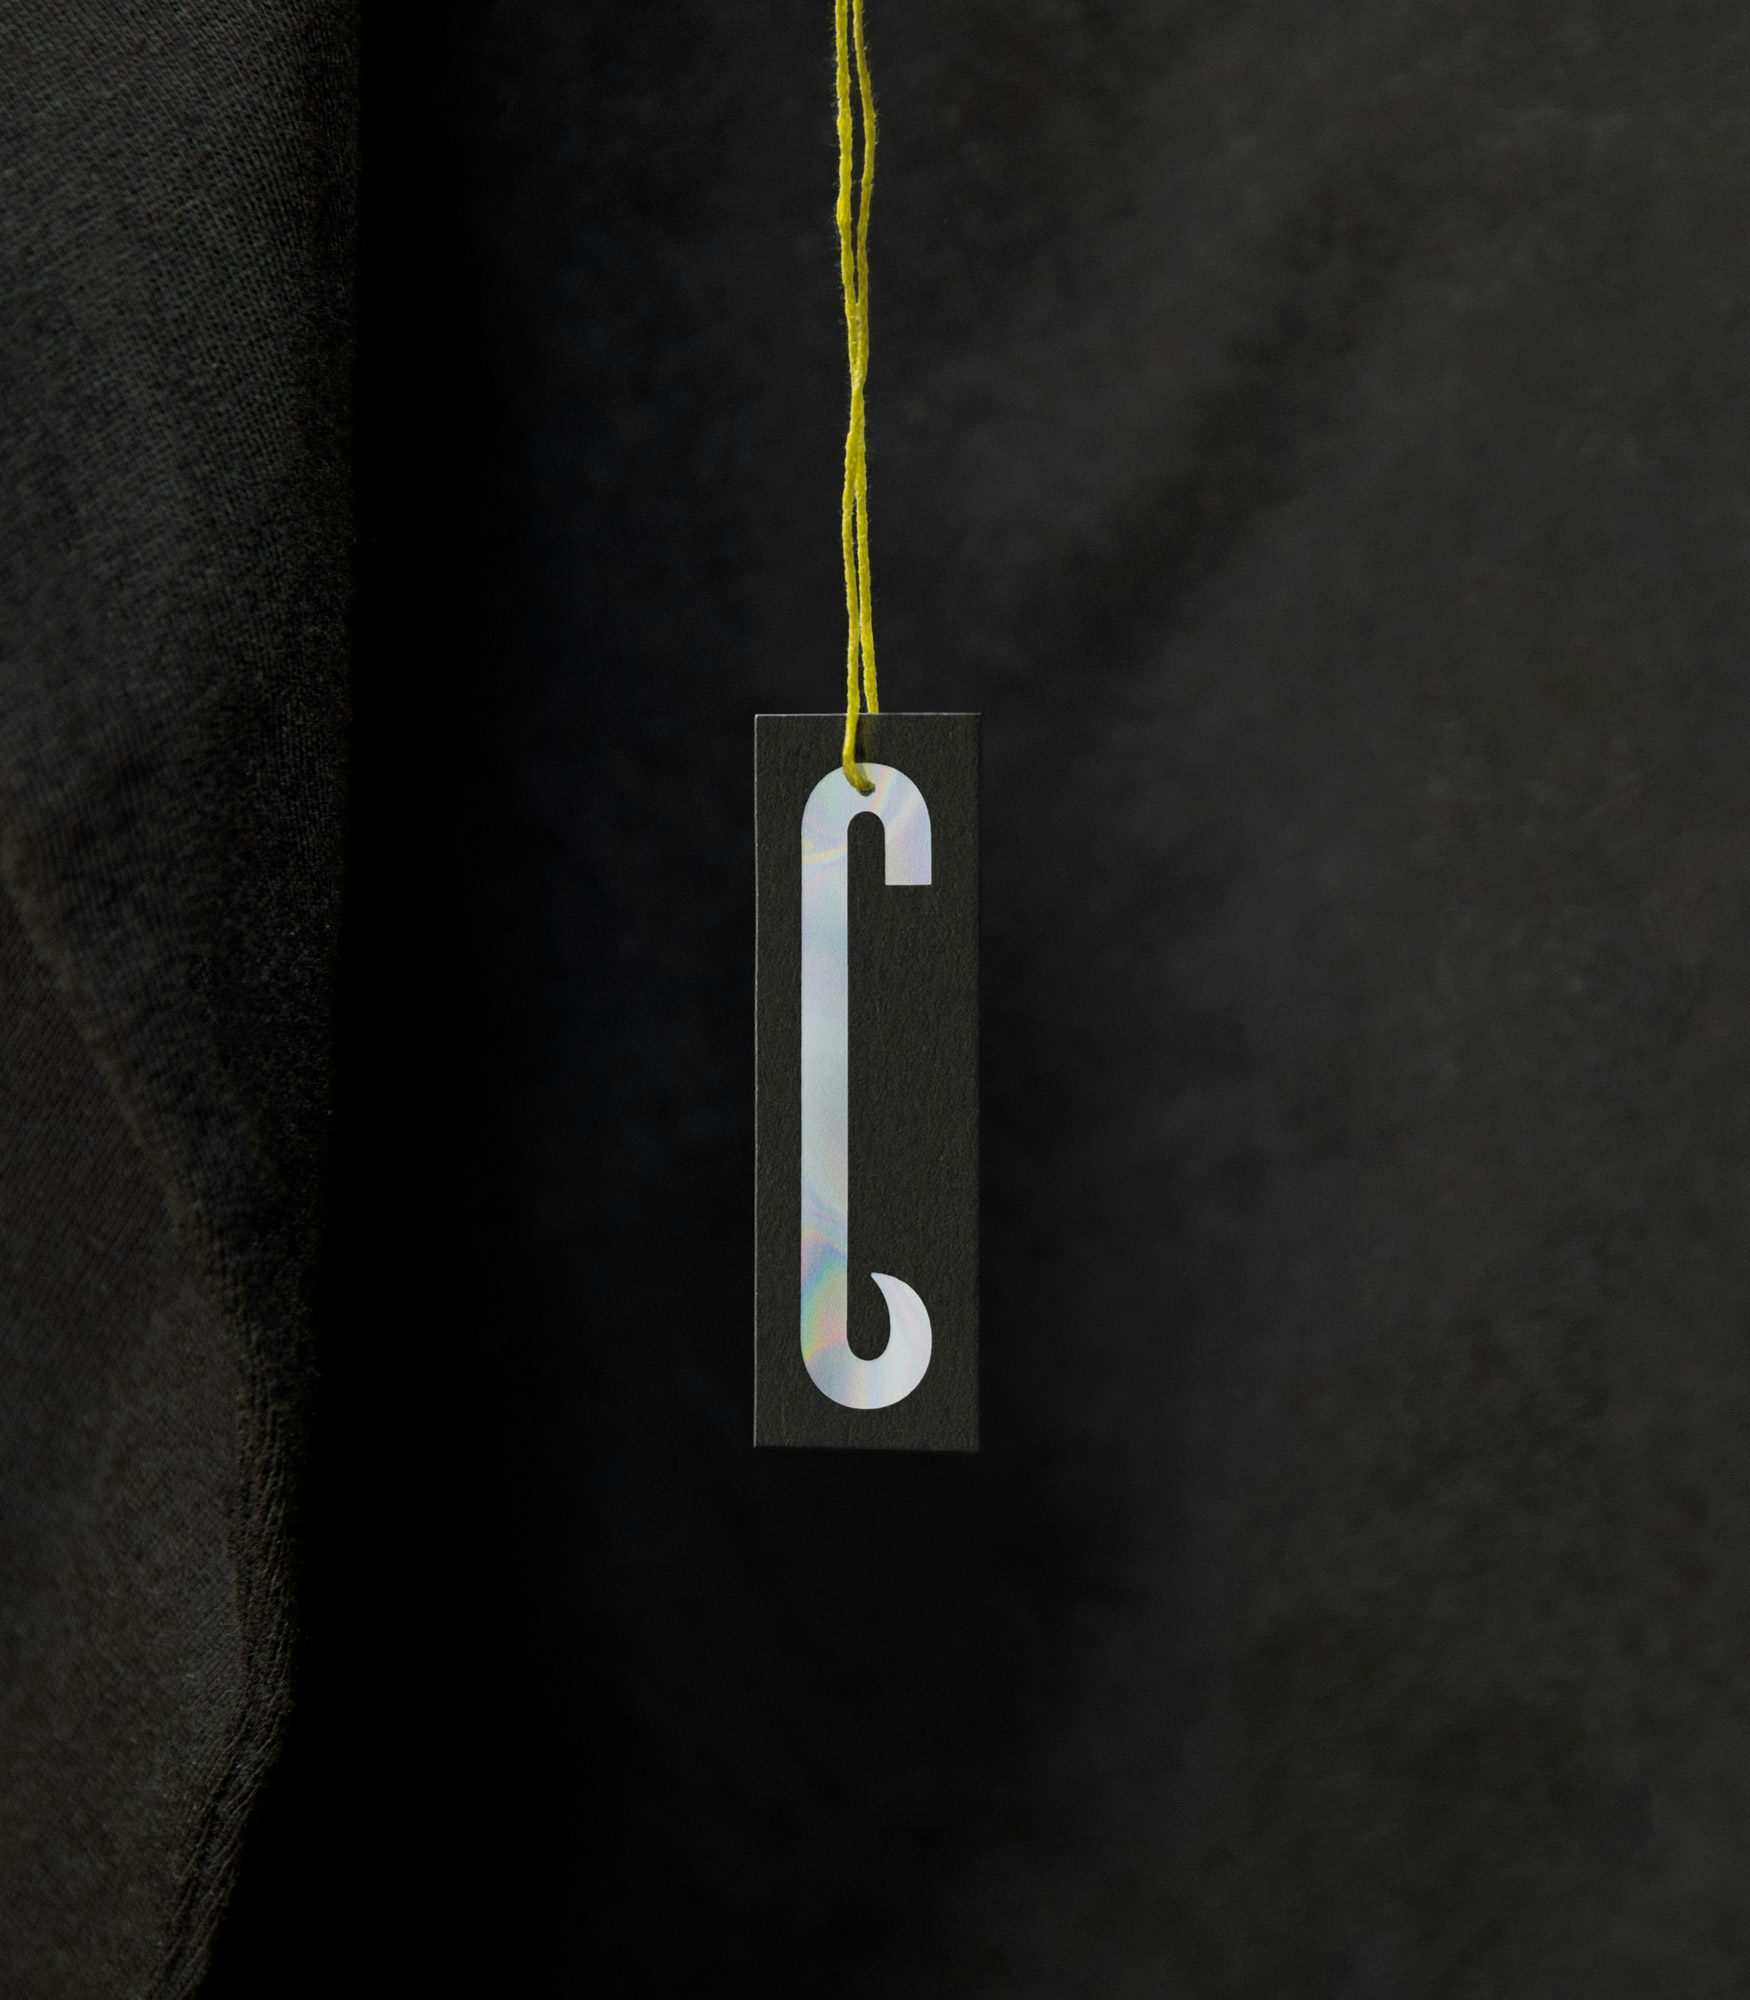 Photograph of a Big C Charters tag, with the elongated 'C' logo